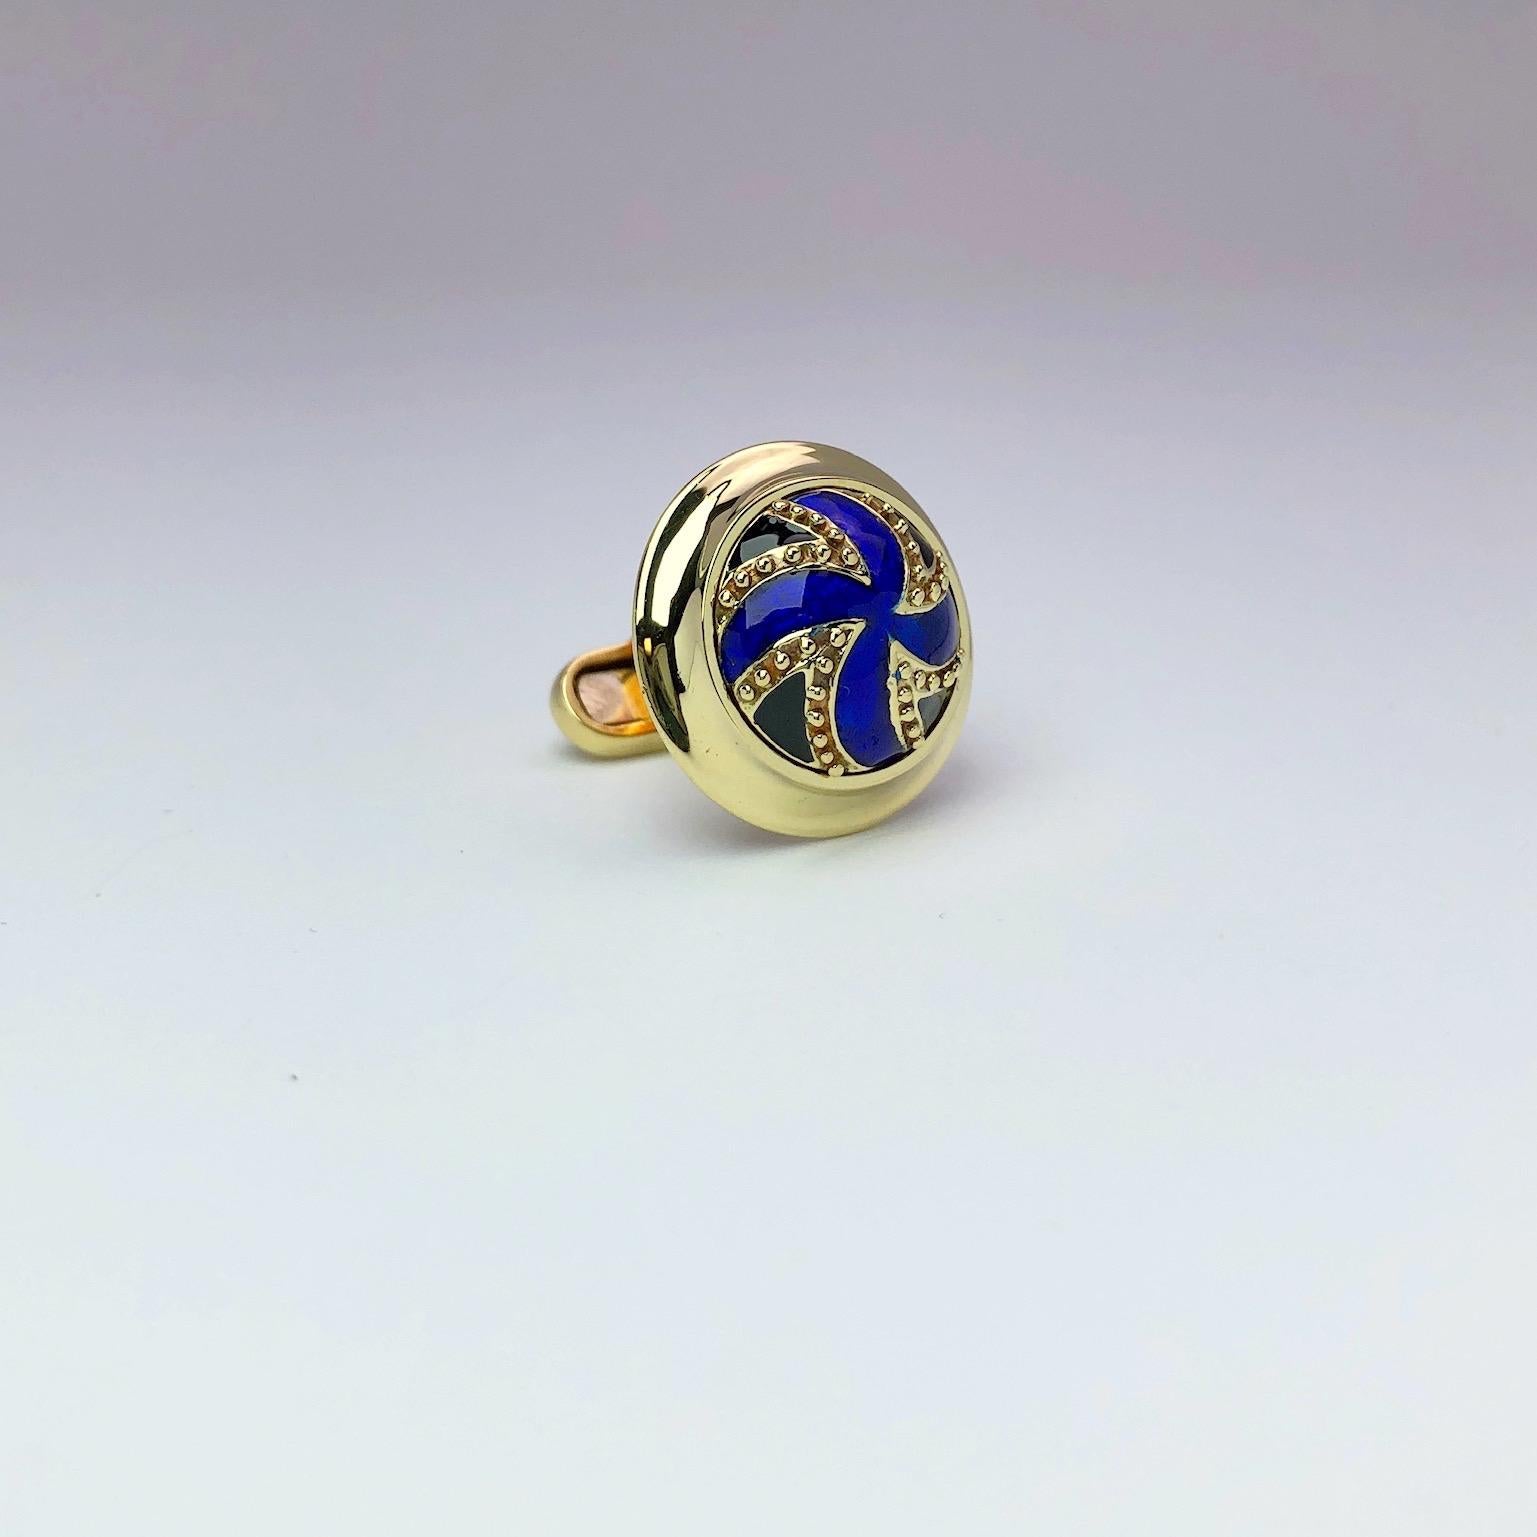 Classic 18 karat yellow gold cufflinks. The center is enameled in a royal blue ,accented with beads of yellow gold. Cufflinks have a hinged bar back. Diameter is 29mm
Stamped 18K
